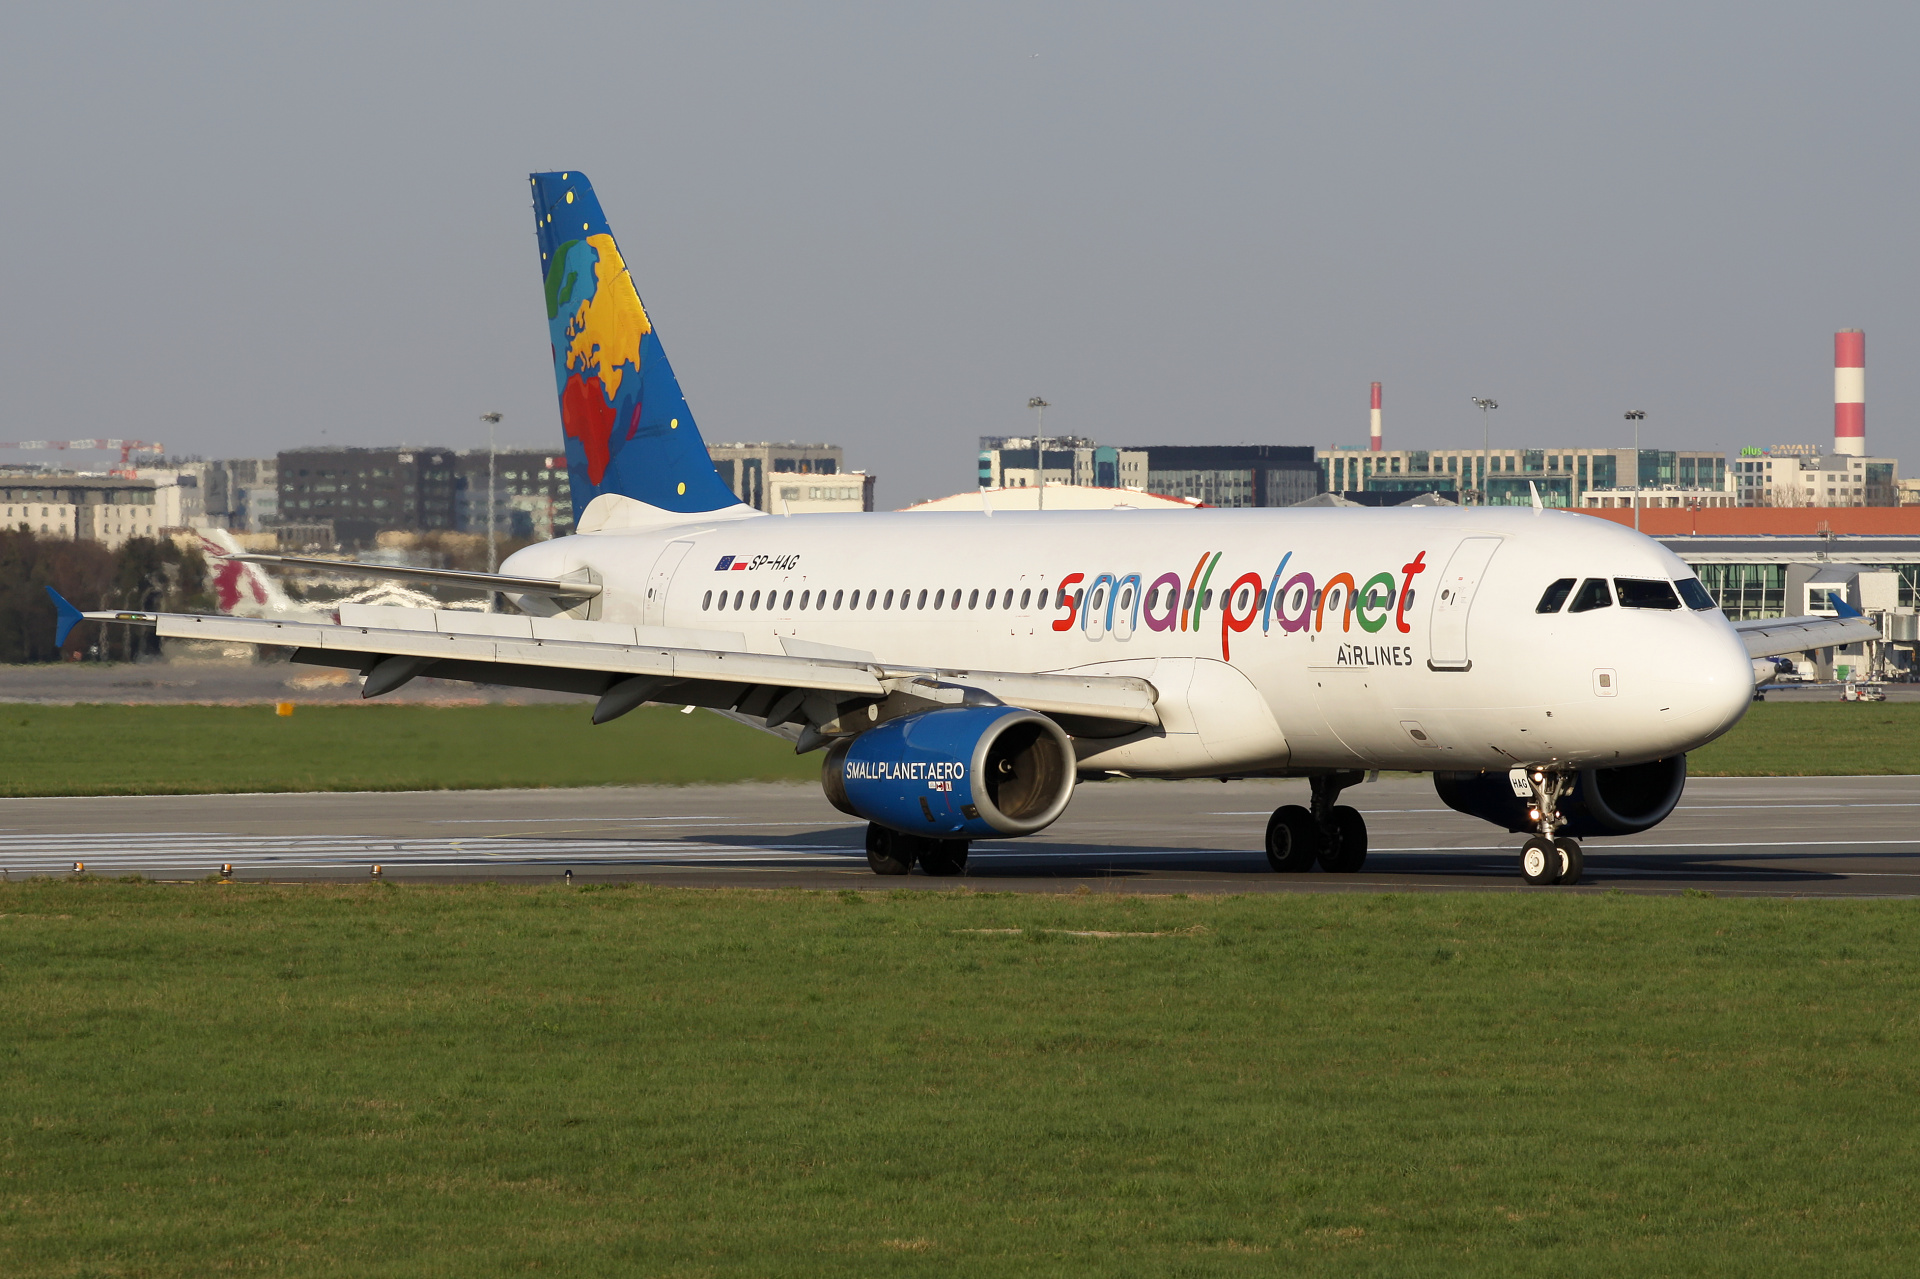 SP-HAG (Aircraft » EPWA Spotting » Airbus A320-200 » Small Planet Airlines)